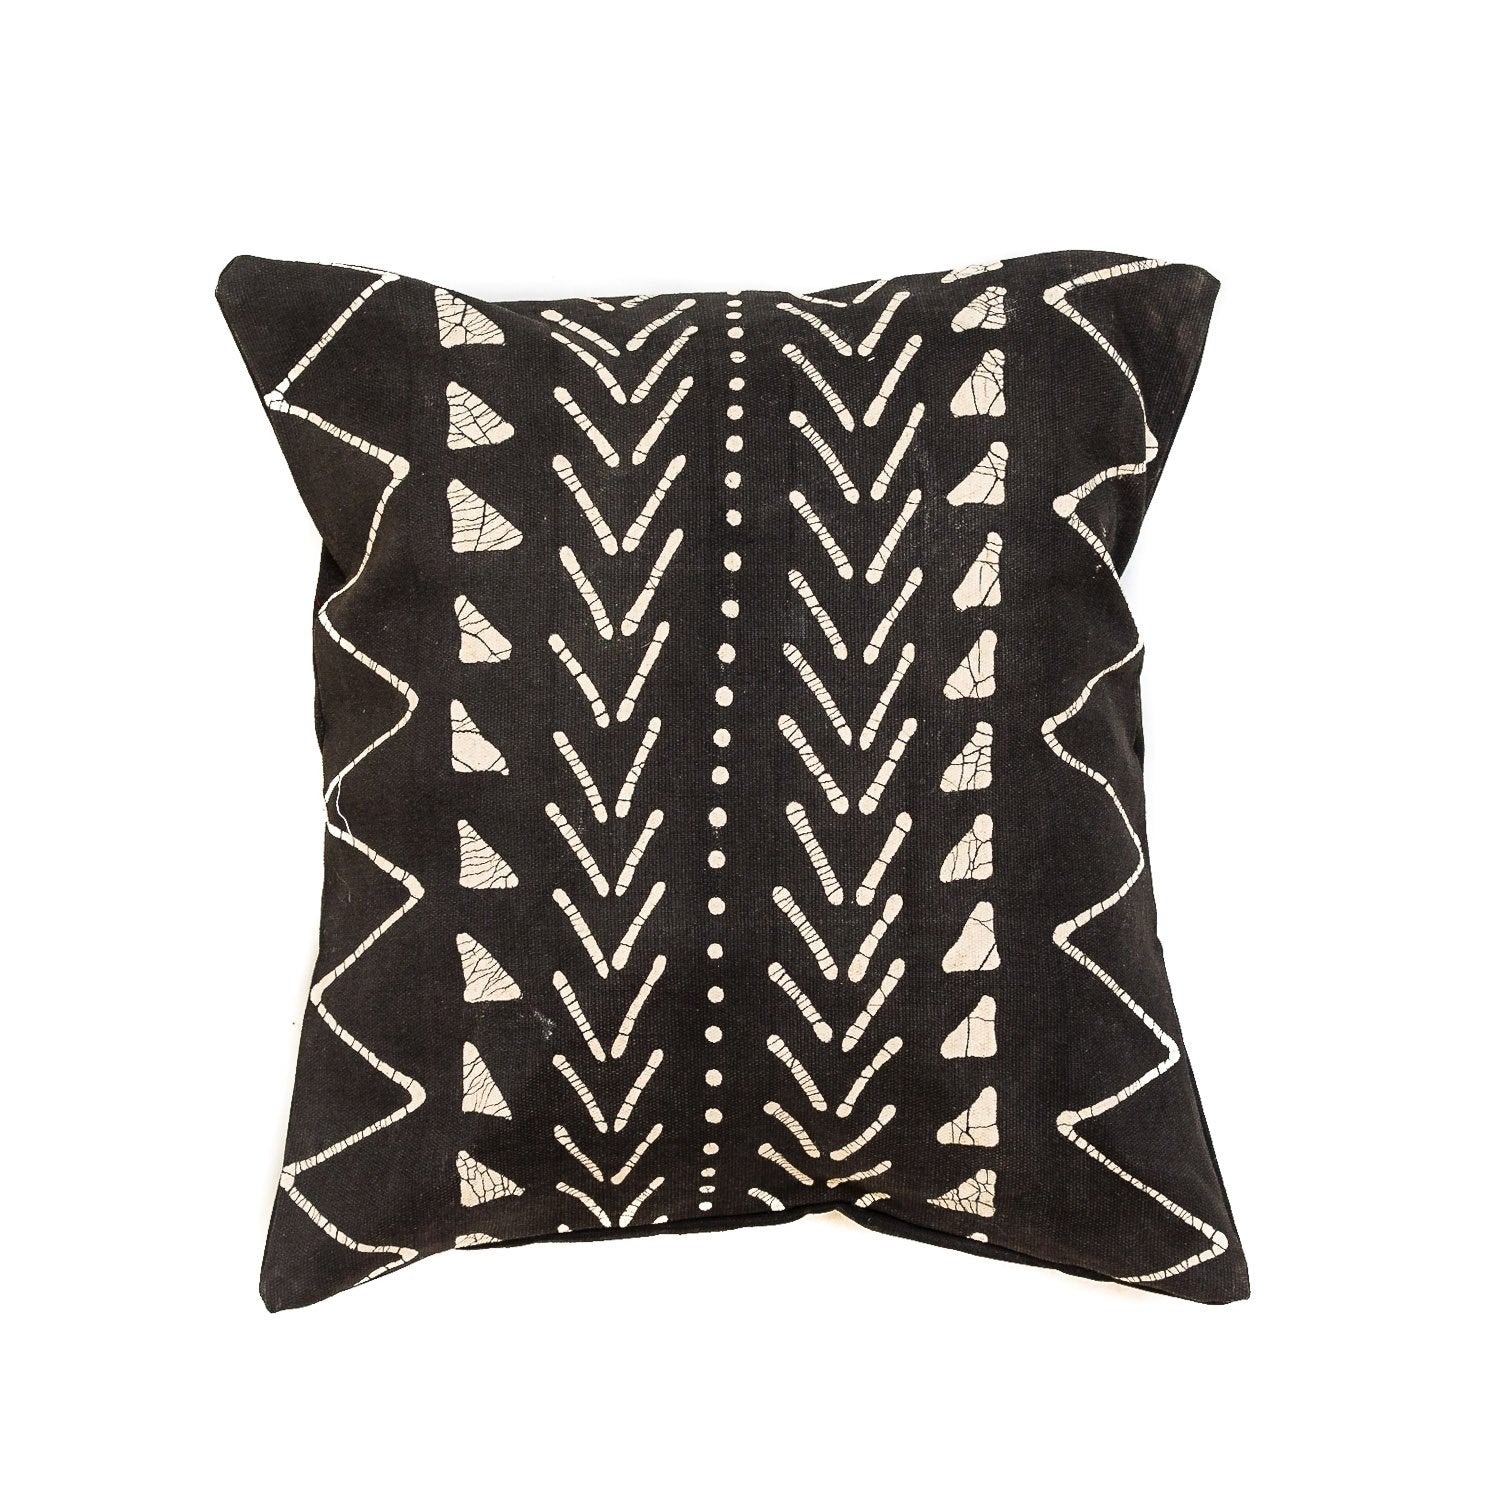 Matika Black Linear Cushion Cover - Hand Painted by TRIBAL TEXTILES - Handcrafted Home Decor Interiors - African Made